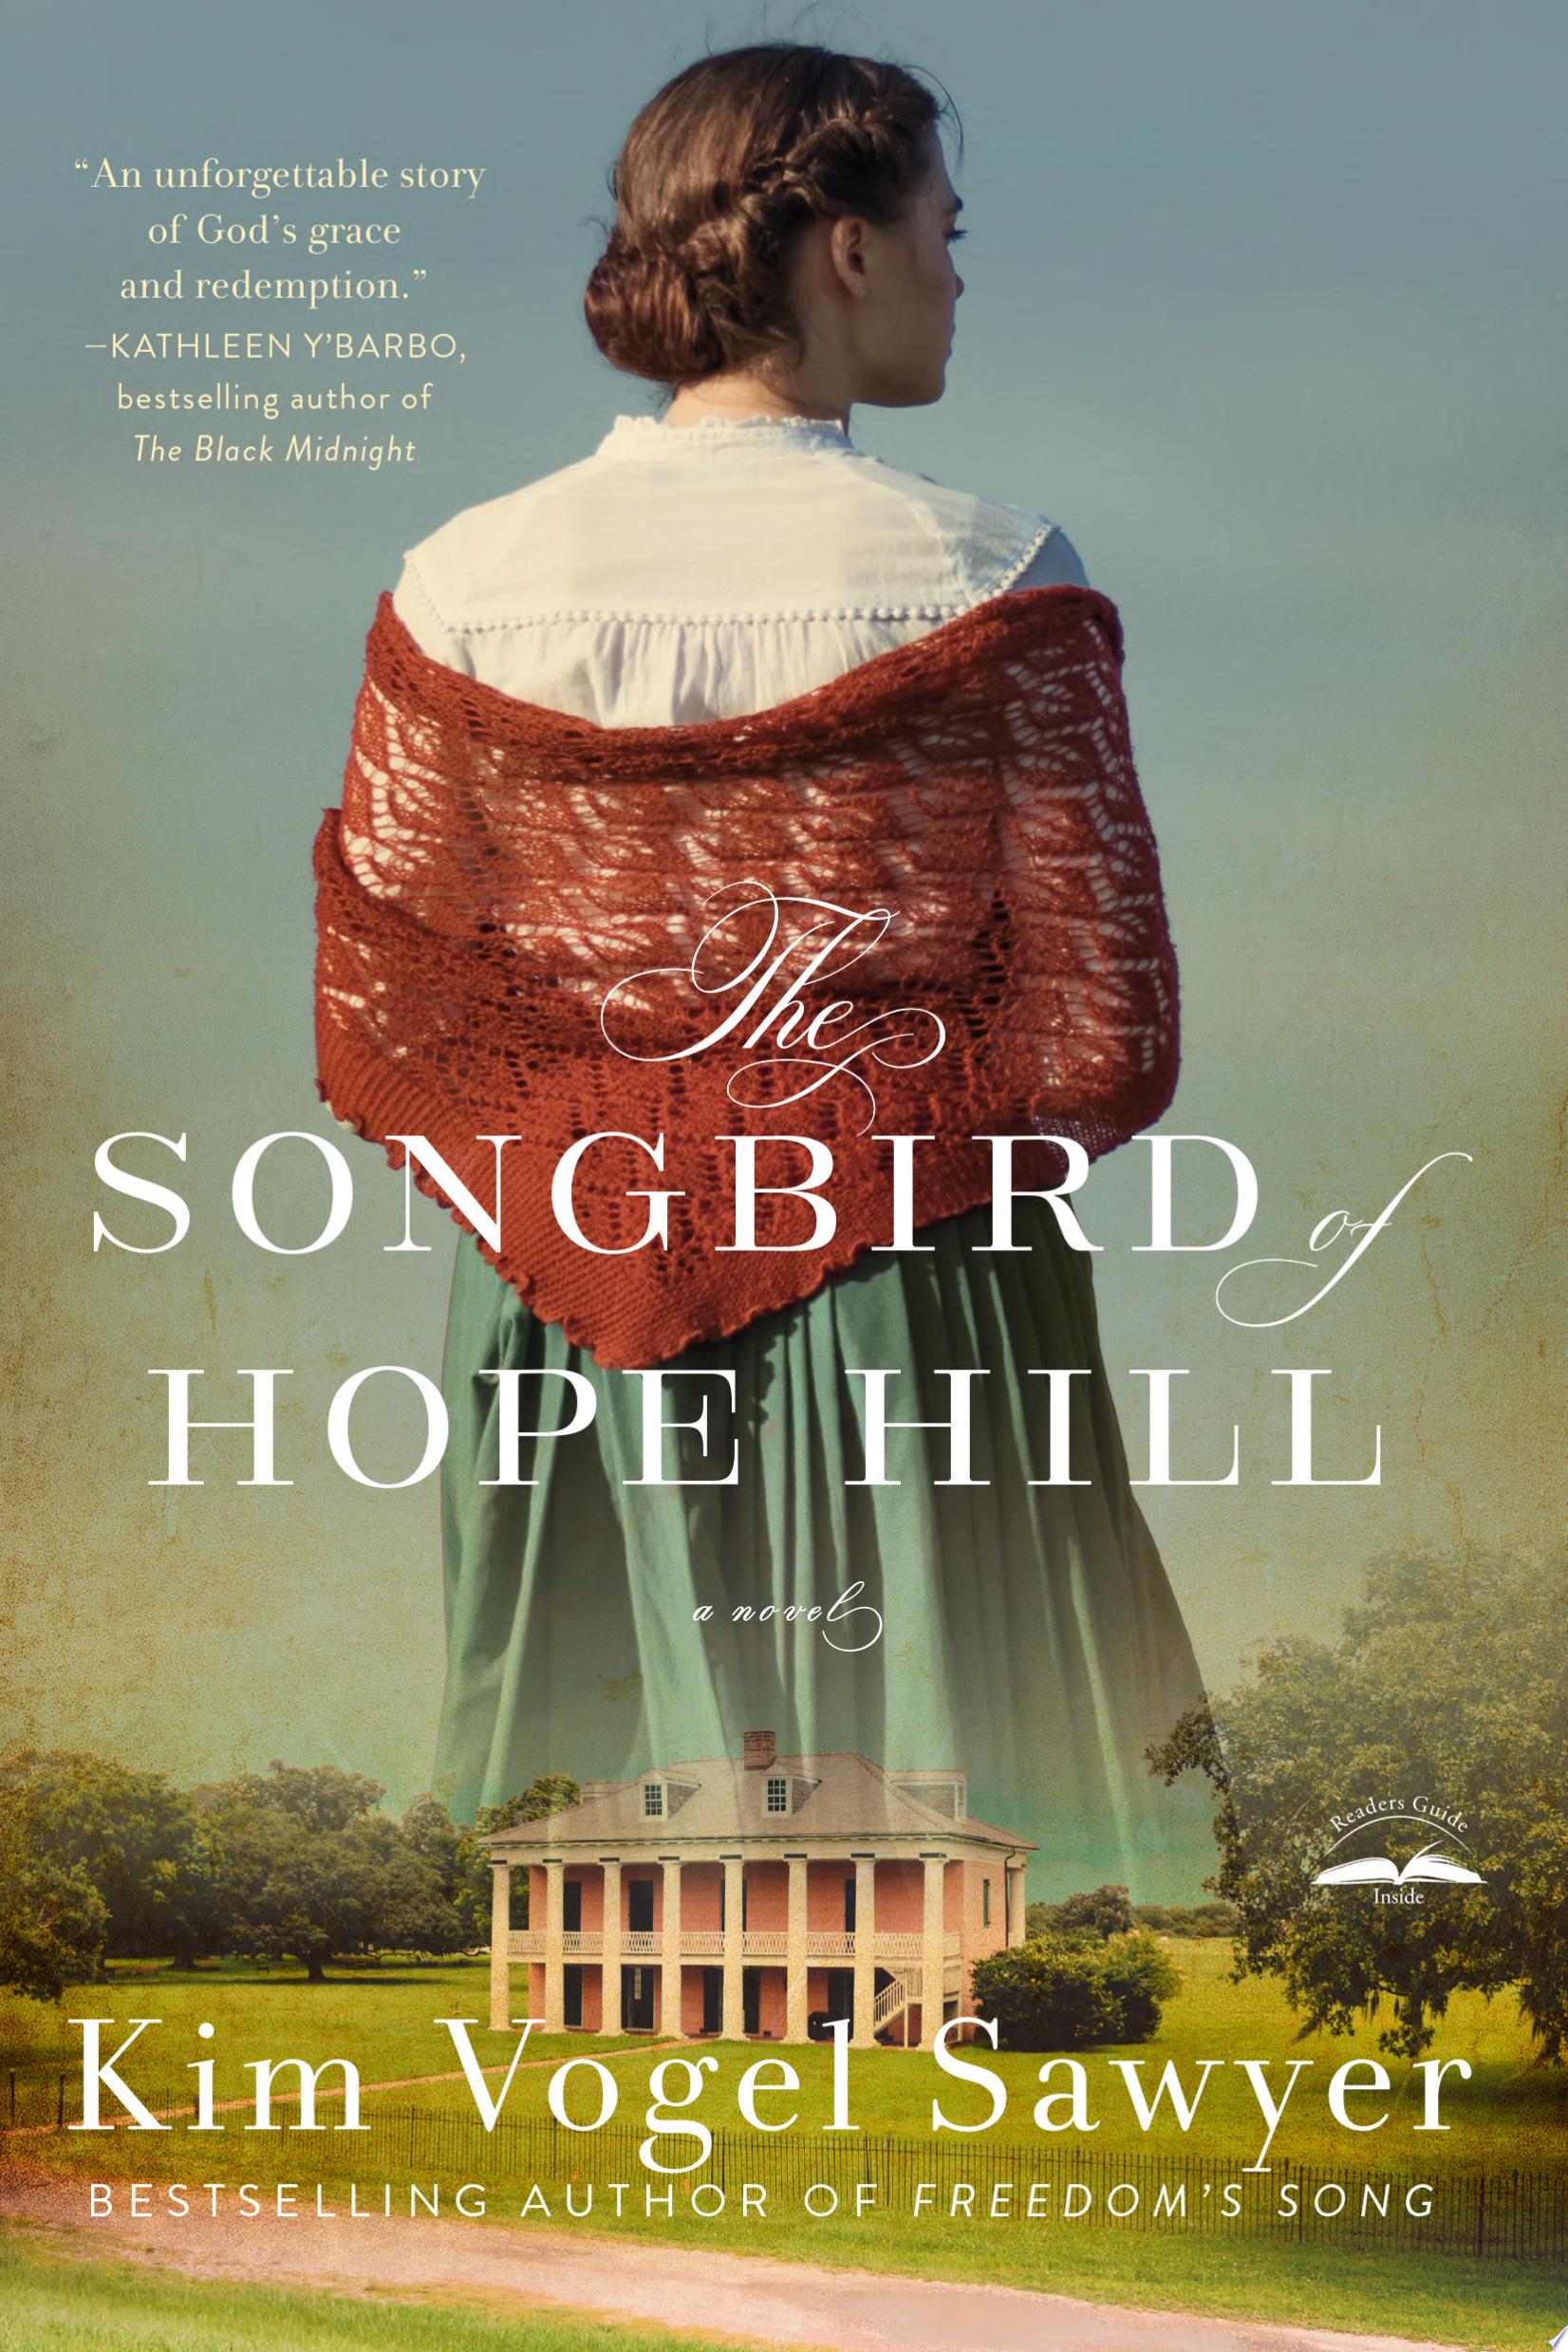 Image for "The Songbird of Hope Hill" by Kim Vogel Sawyer